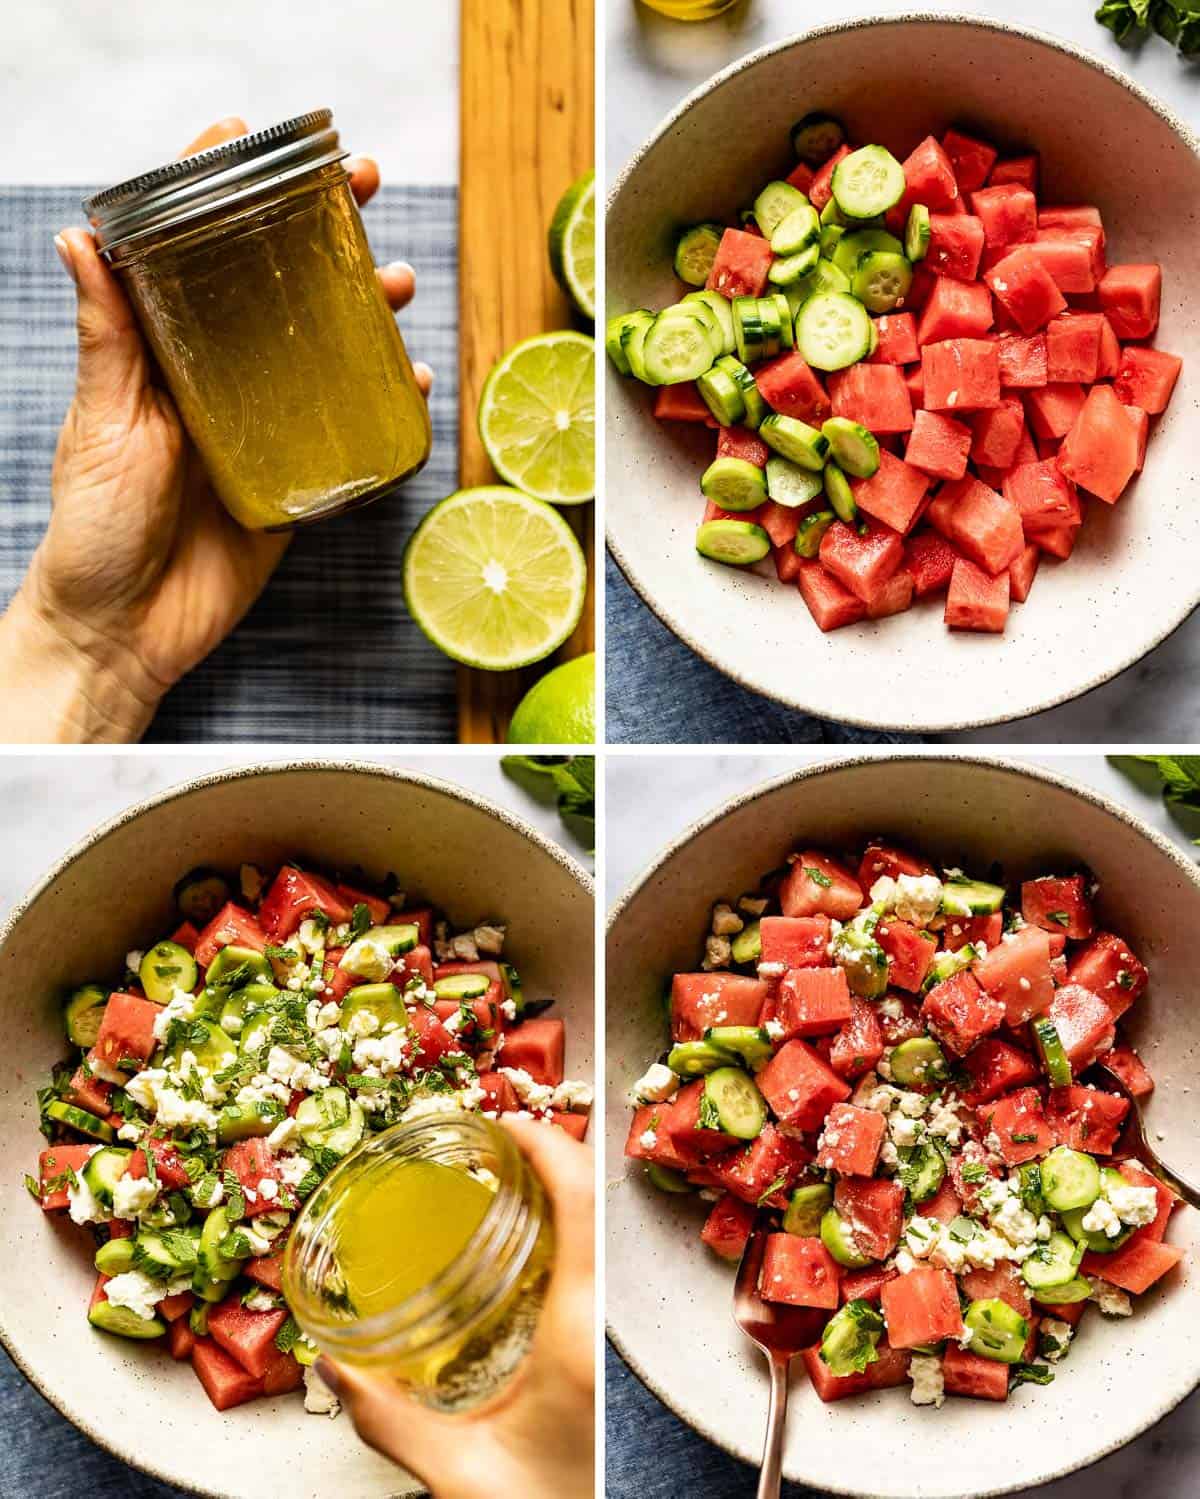 A collage of images showing how to make watermelon salad.